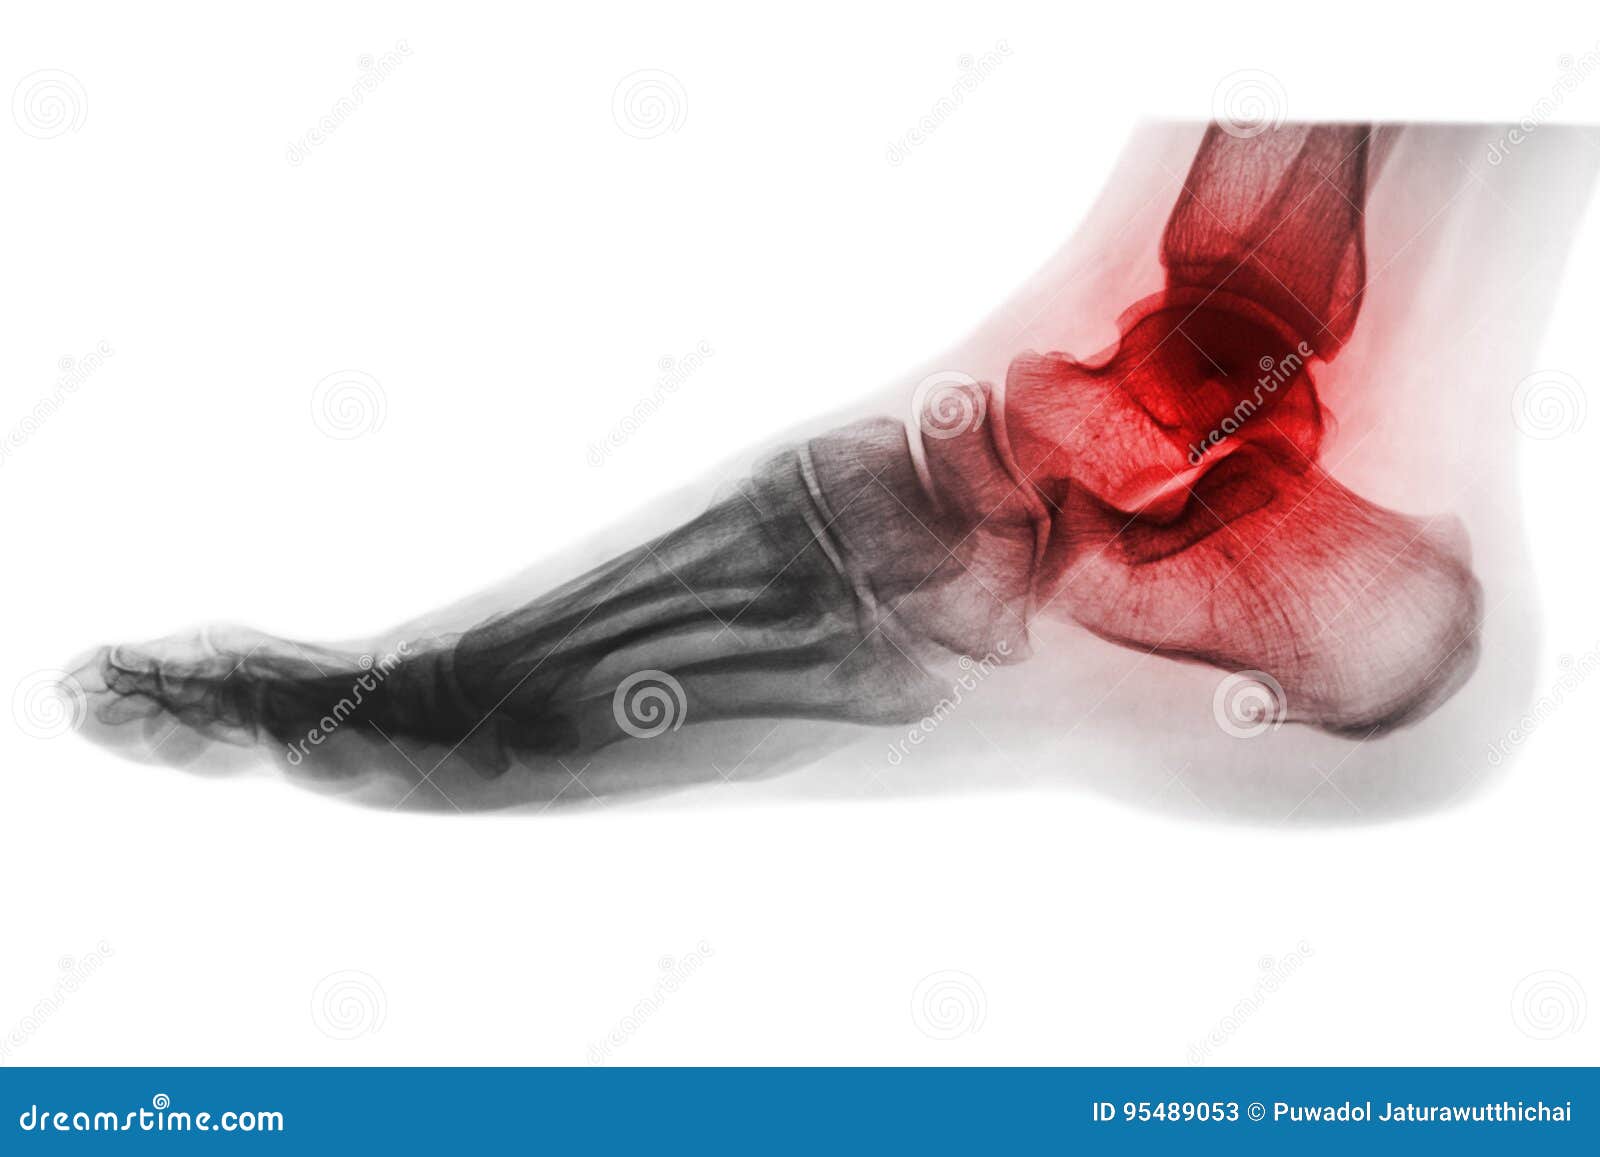 arthritis of ankle . x-ray of foot . lateral view . invert color style